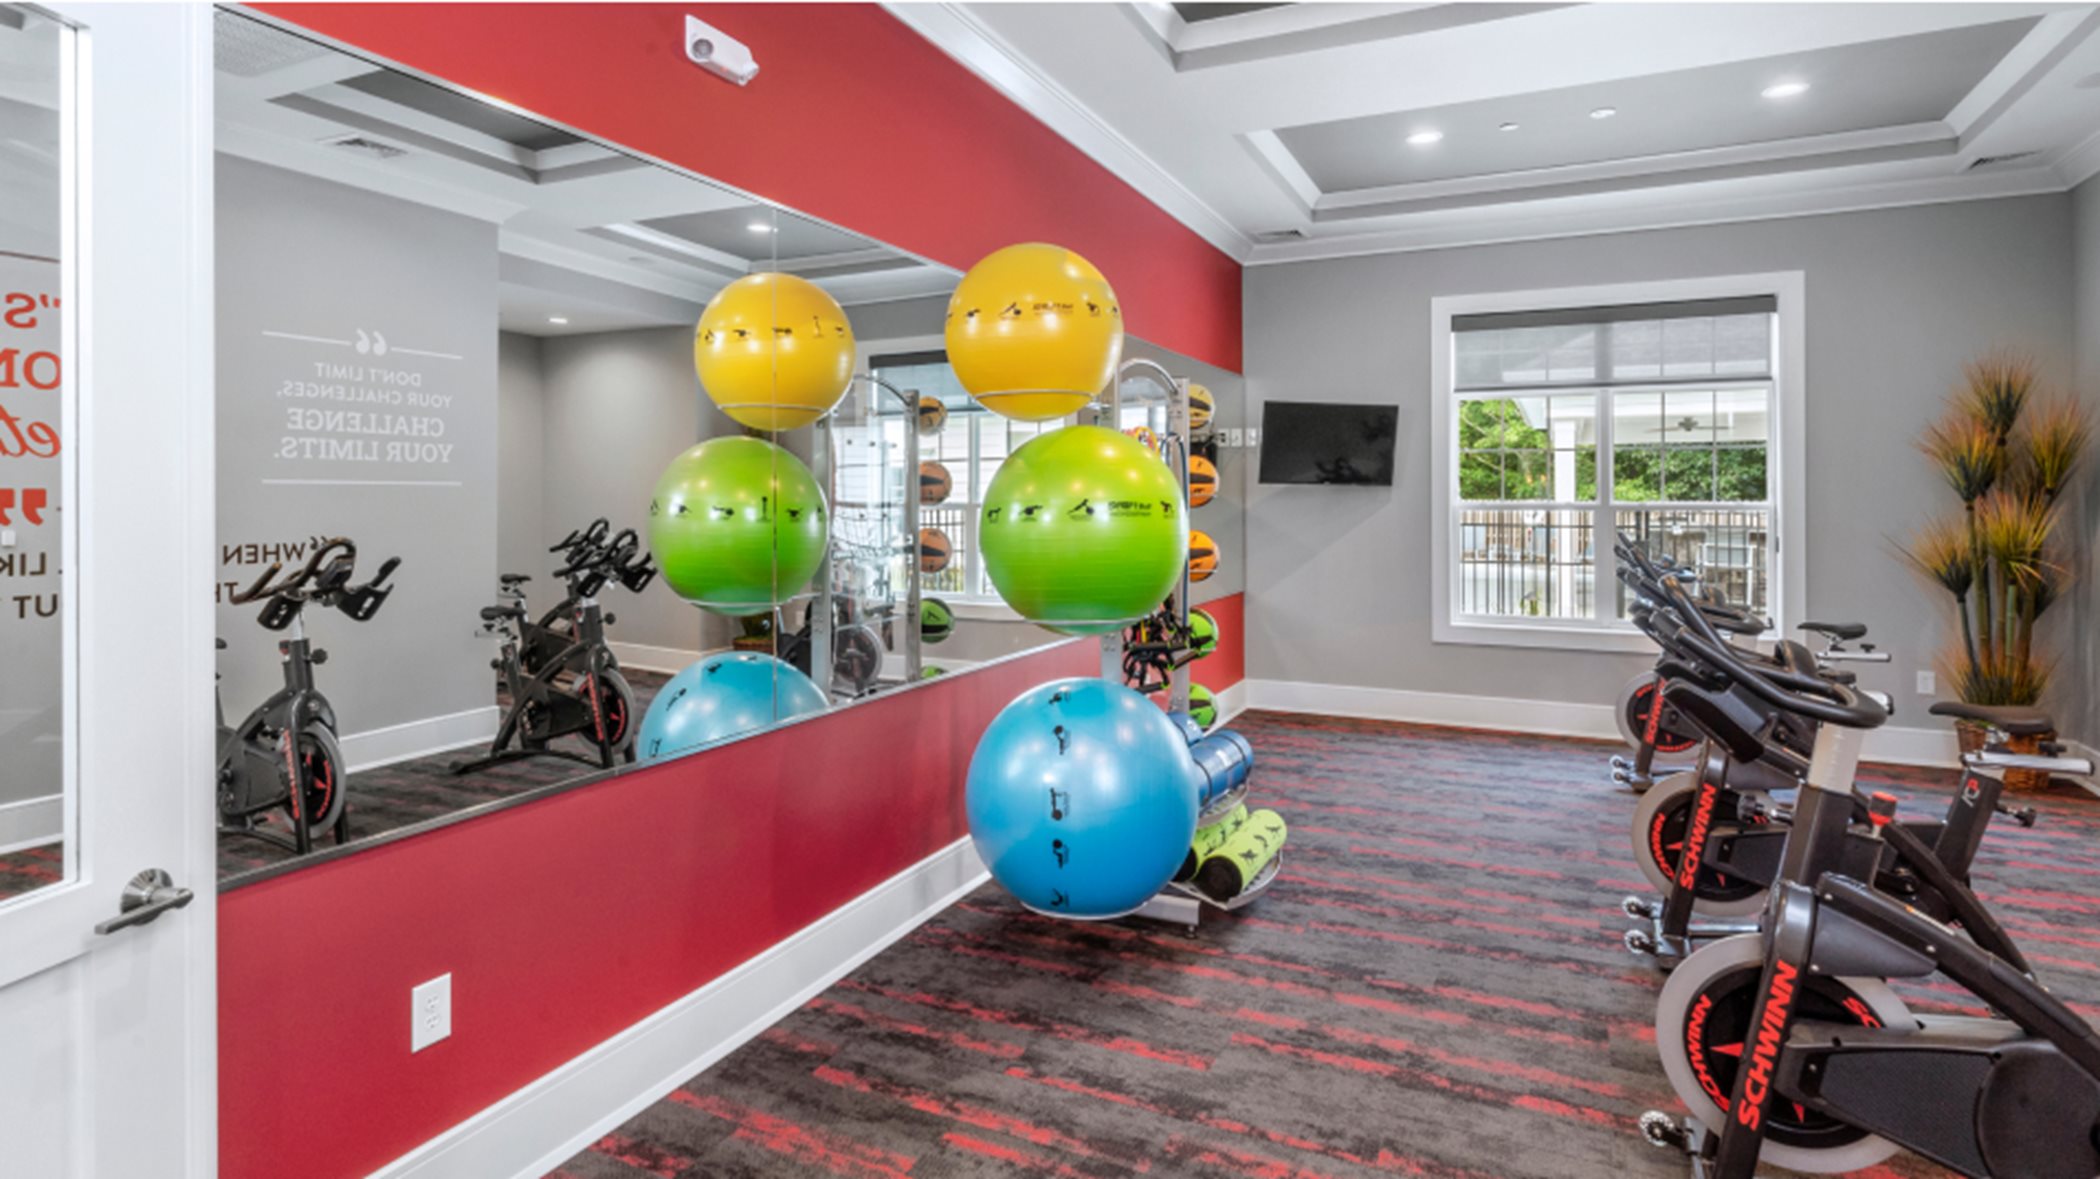 Aerobics room with stationary bikes and exercise balls